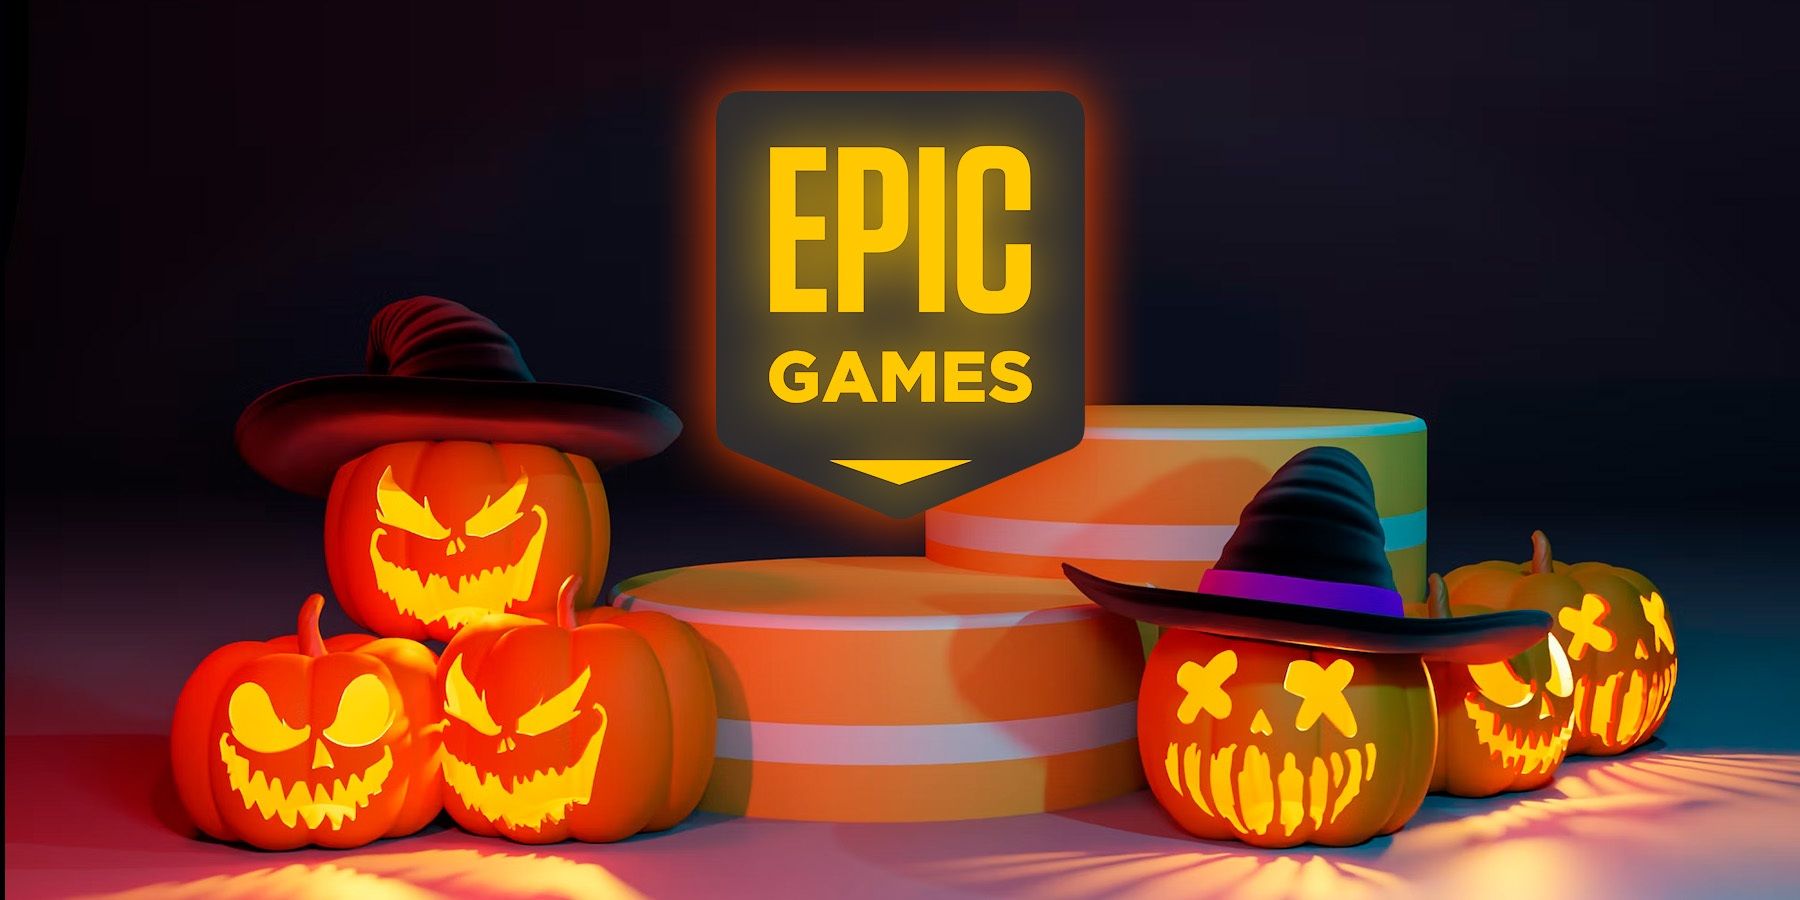 Epic Games Store Makes Popular AAA Horror Game Free for Halloween